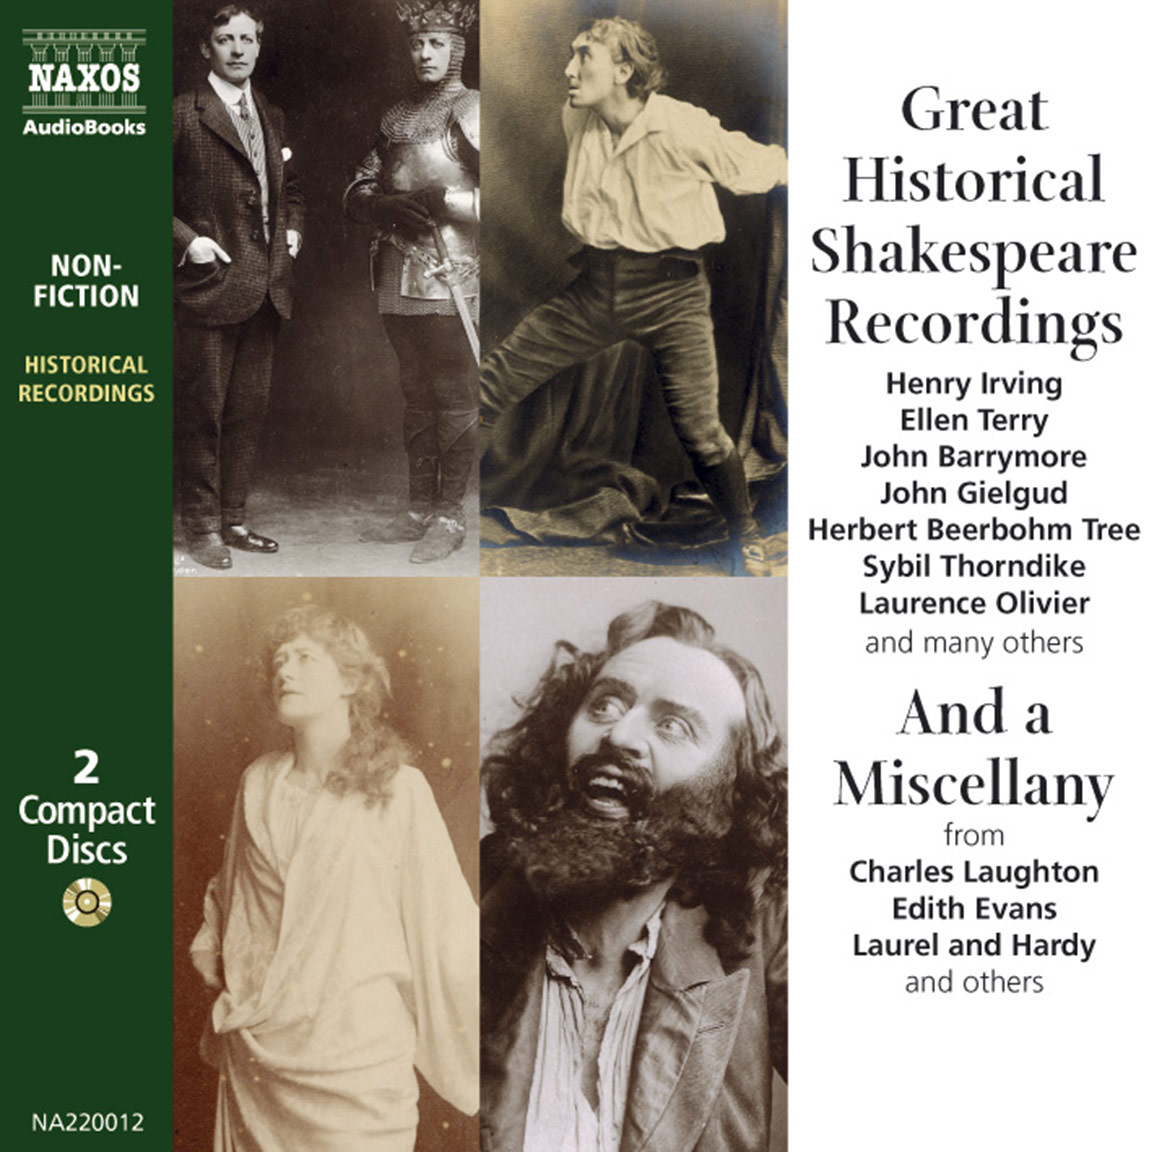 Great Historical Shakespeare Recordings (selections)